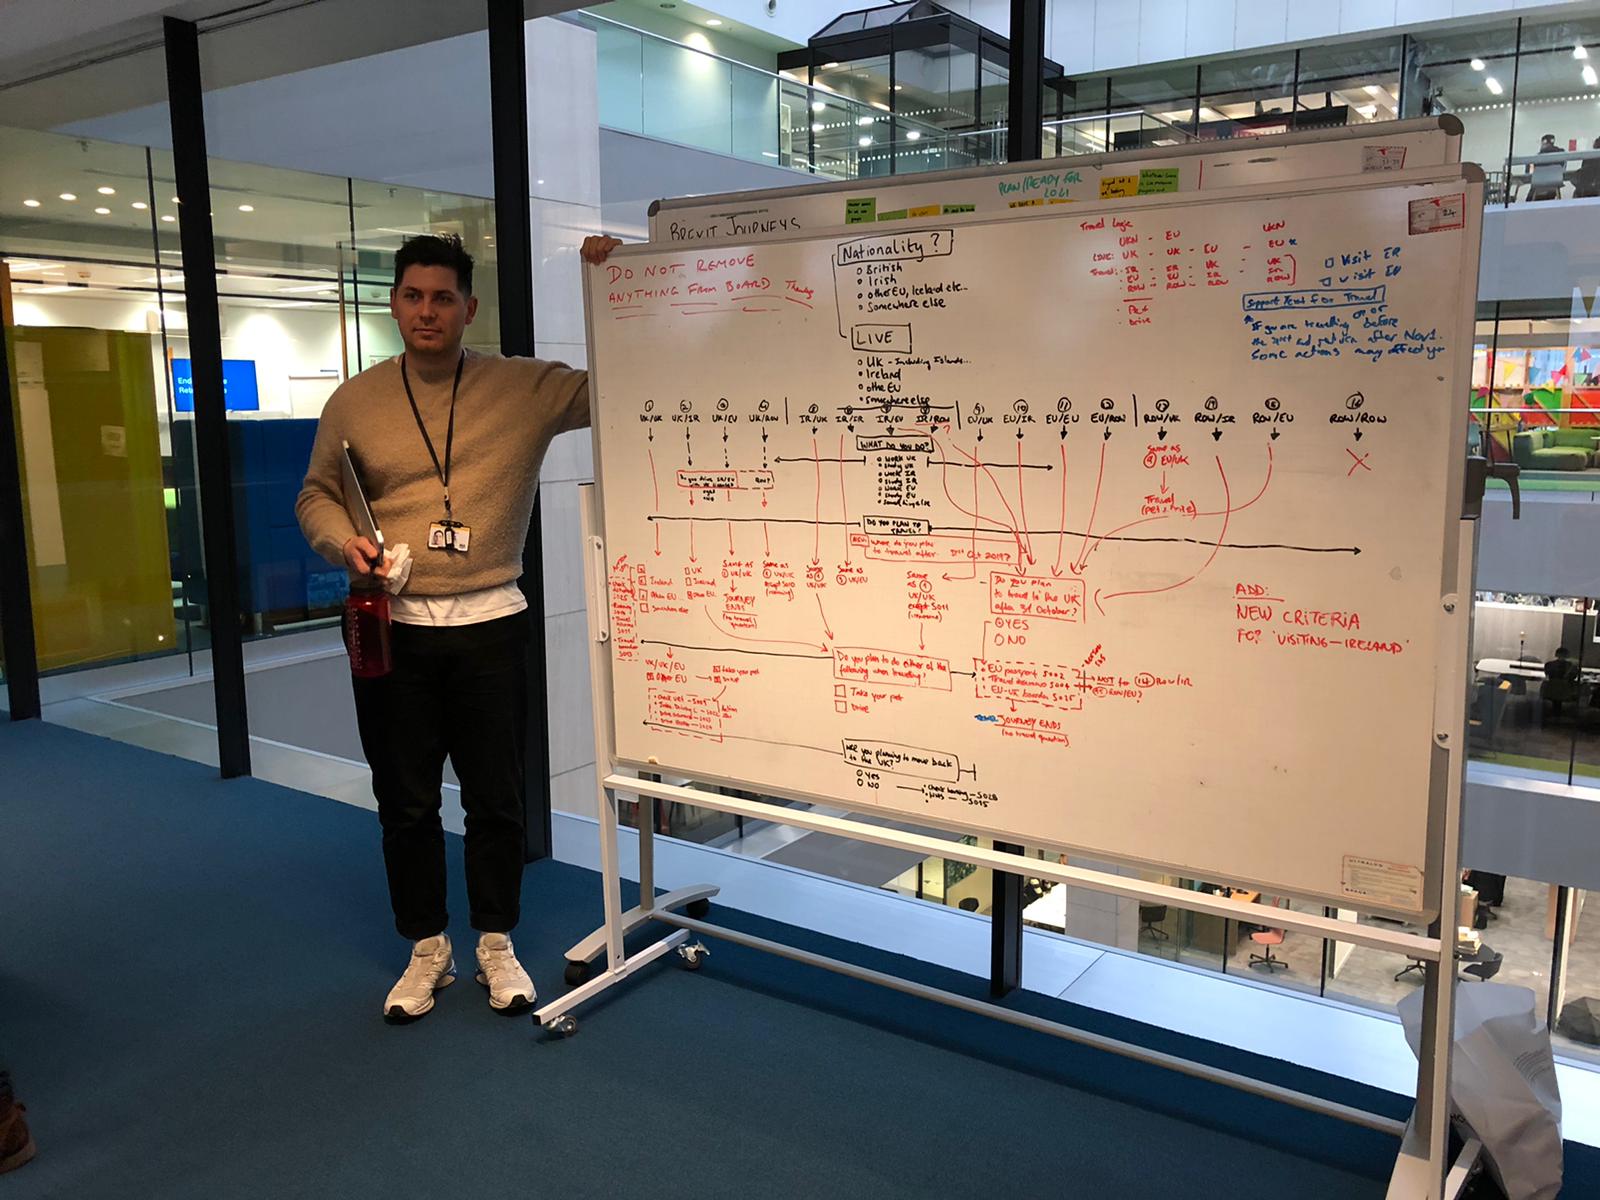 Image of a person standing next to a whiteboard. The whiteboard has a sketch of a set of criteria and logic to determine different journeys according to users circumstances...